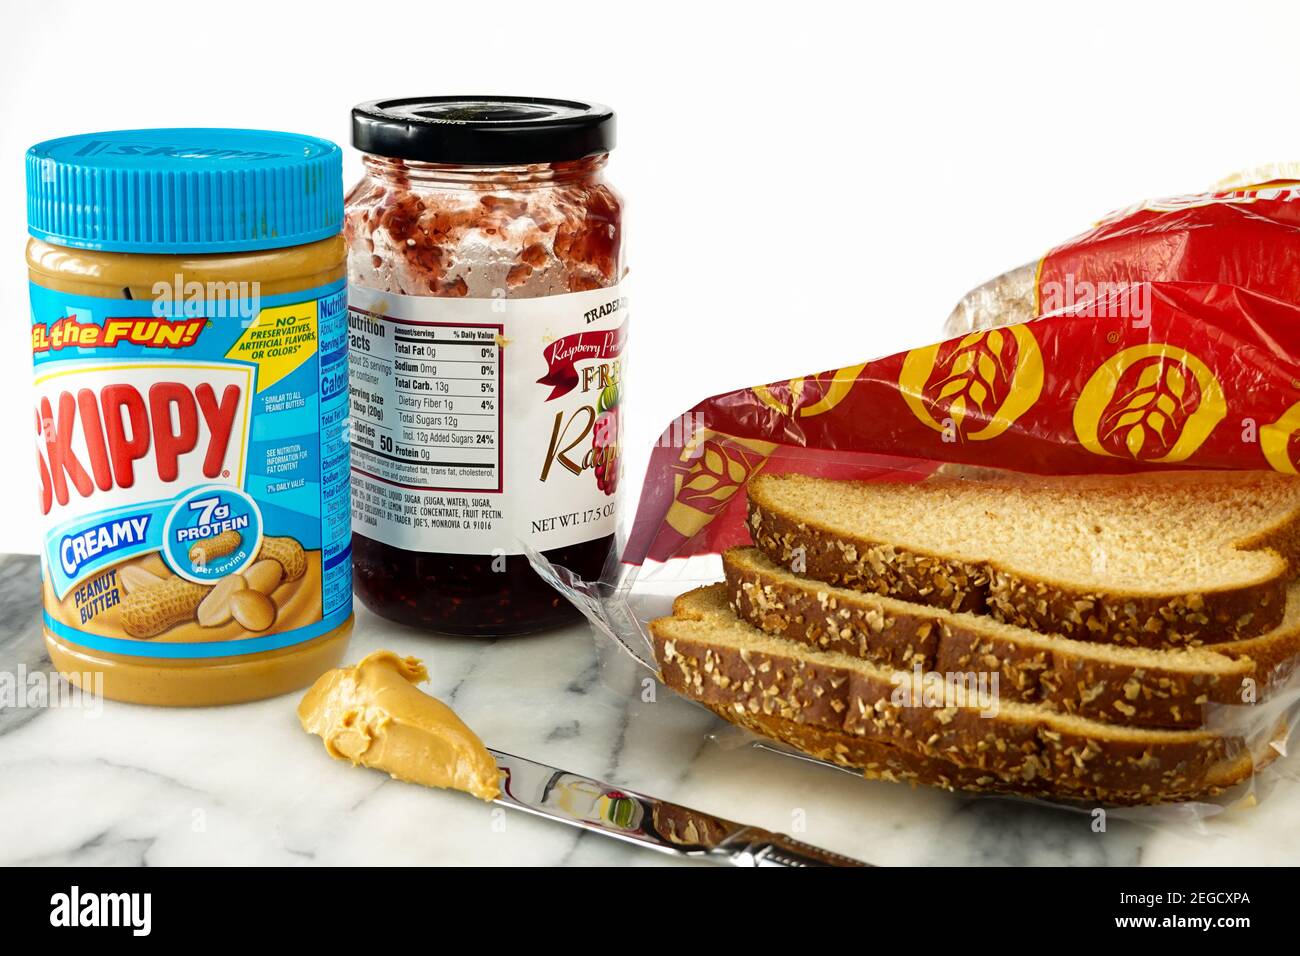 https://c8.alamy.com/comp/2EGCXPA/skippy-peanut-butter-and-a-jar-of-raspberry-jelly-or-raspberry-jam-with-wholewheat-bread-and-peanut-butter-on-a-knife-2EGCXPA.jpg